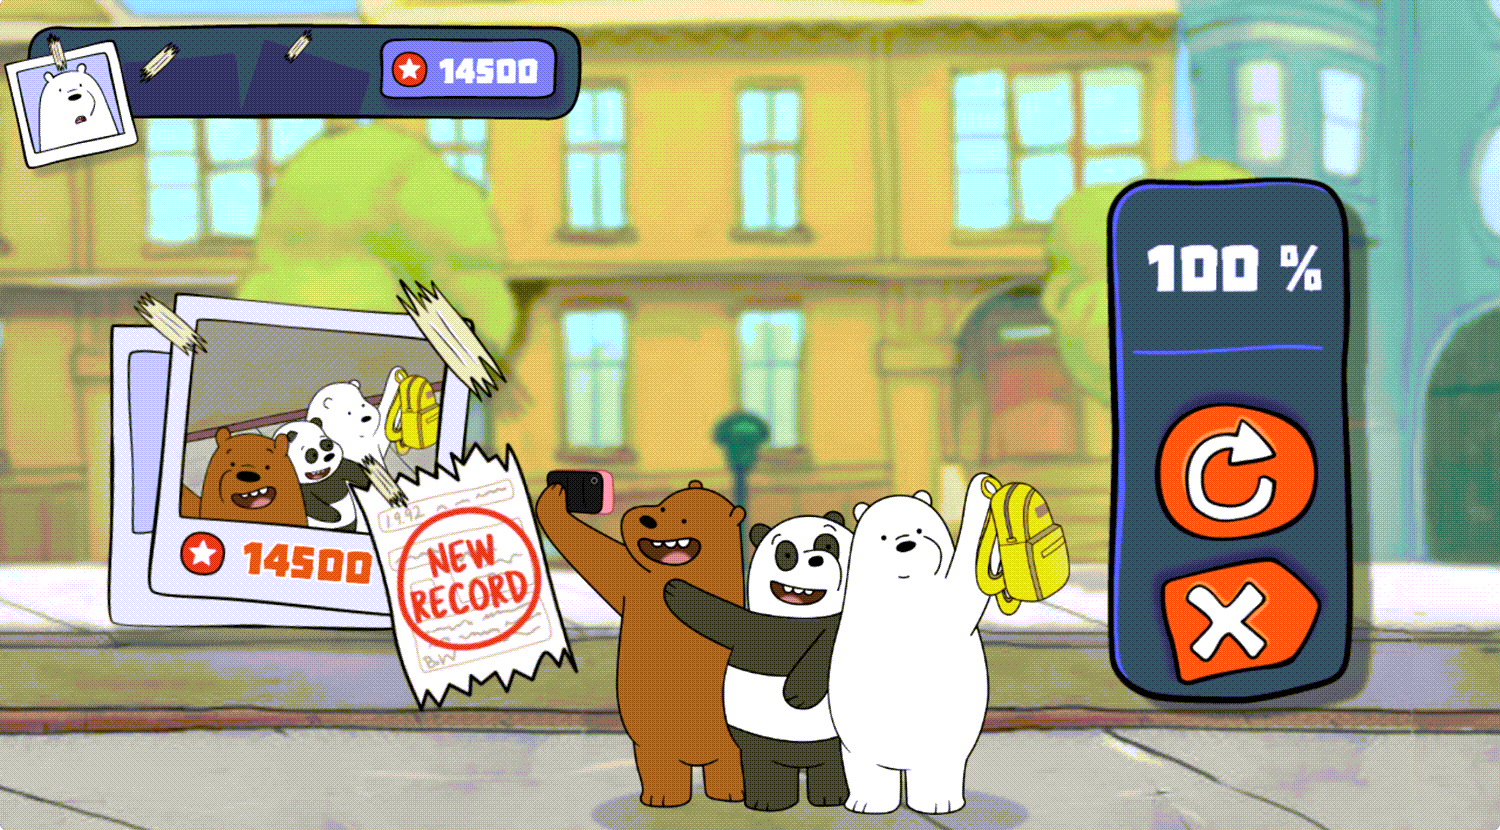 We Bare Bears Feathered Chase New Record Screenshot.